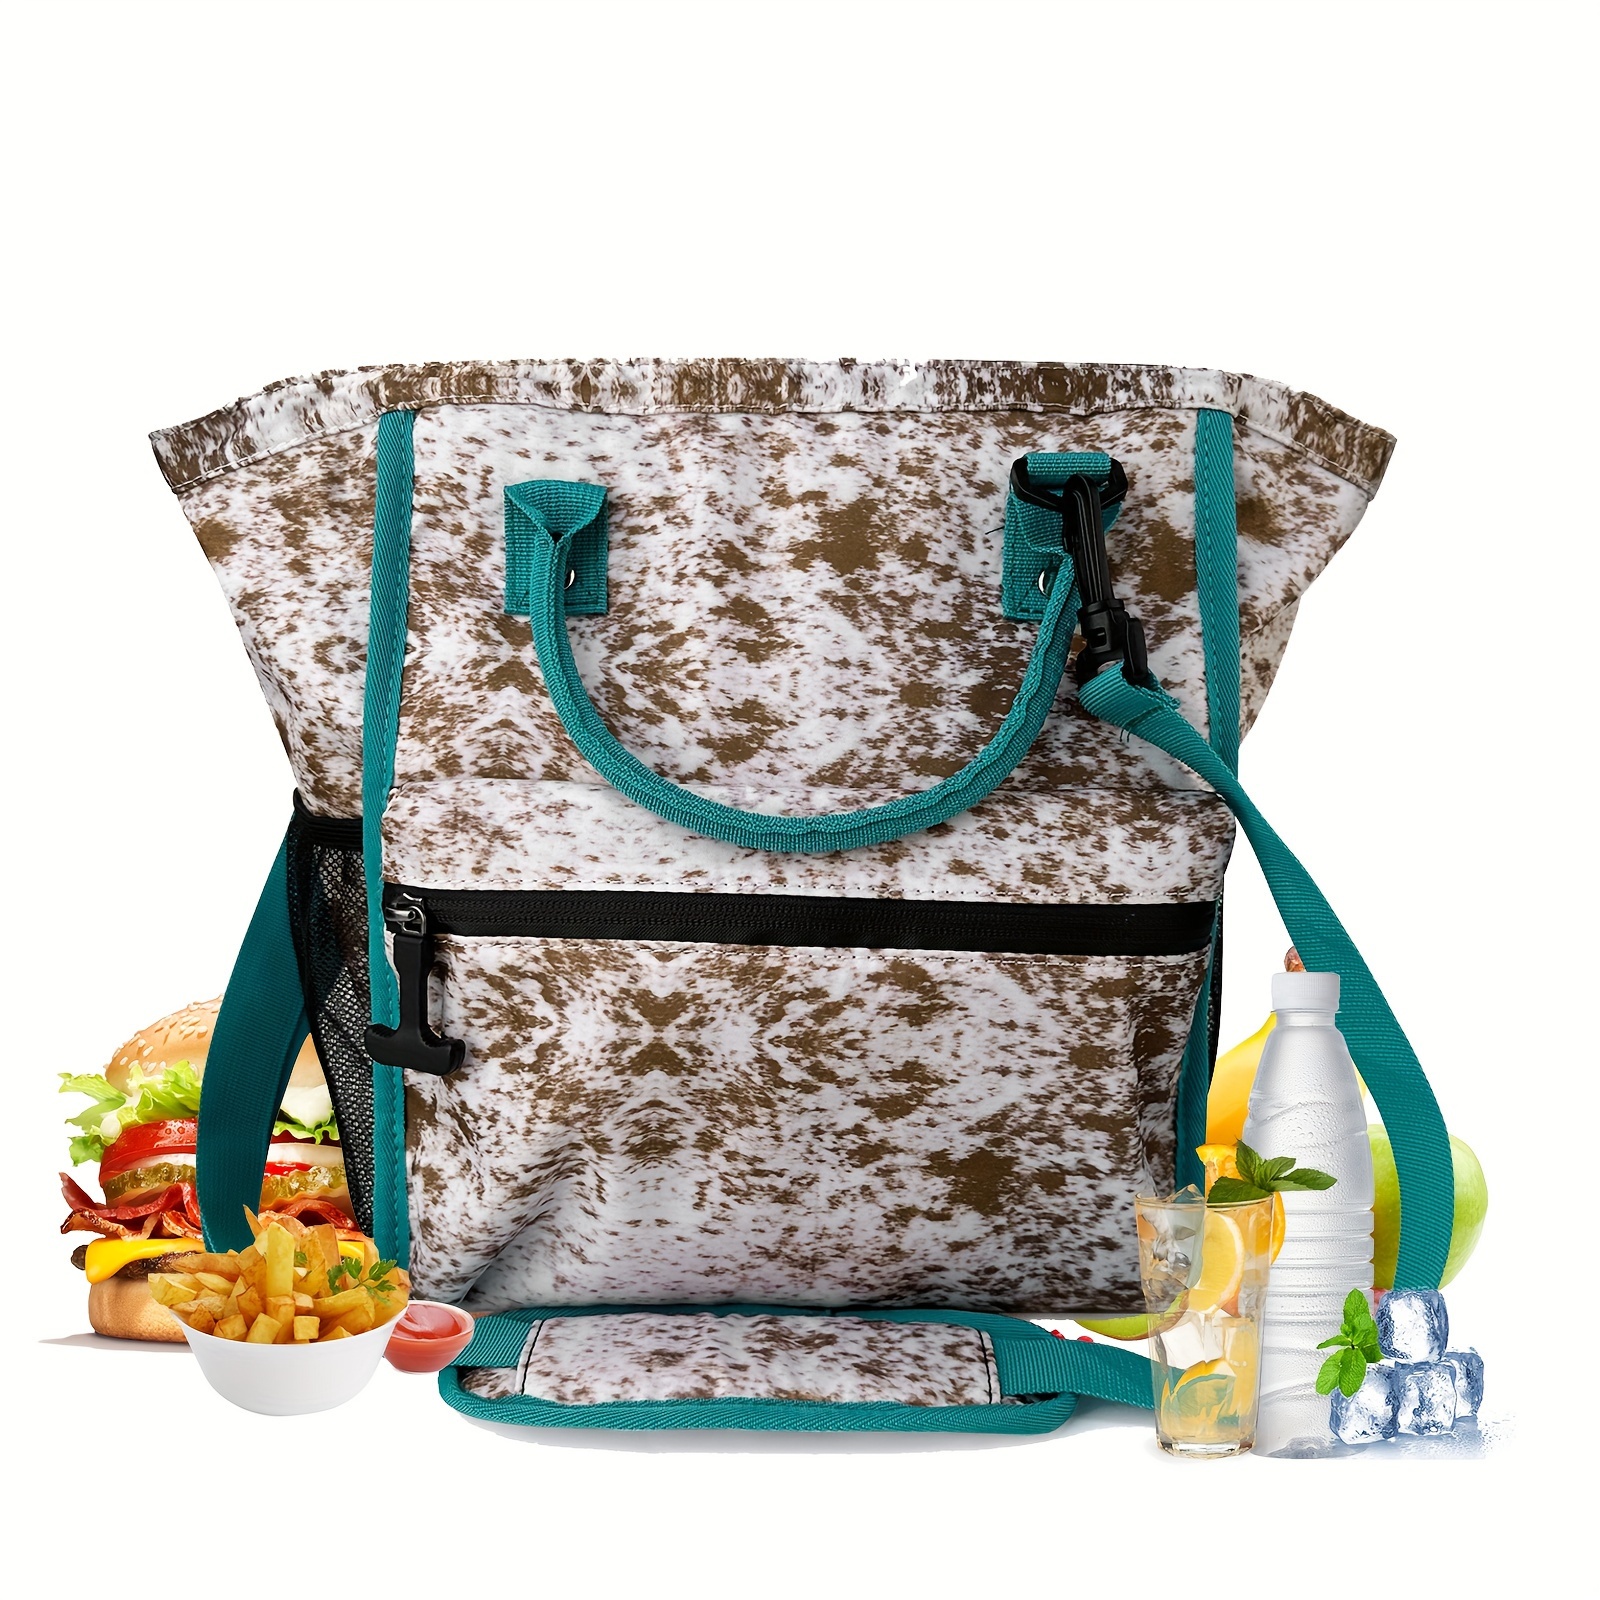 Giraffe With Floral Print Lunch Bag For Women Men Insulated Waterproof Lunch Box Leakproof Cooler Lunch Tote Bag With Adjustable Should-skid813